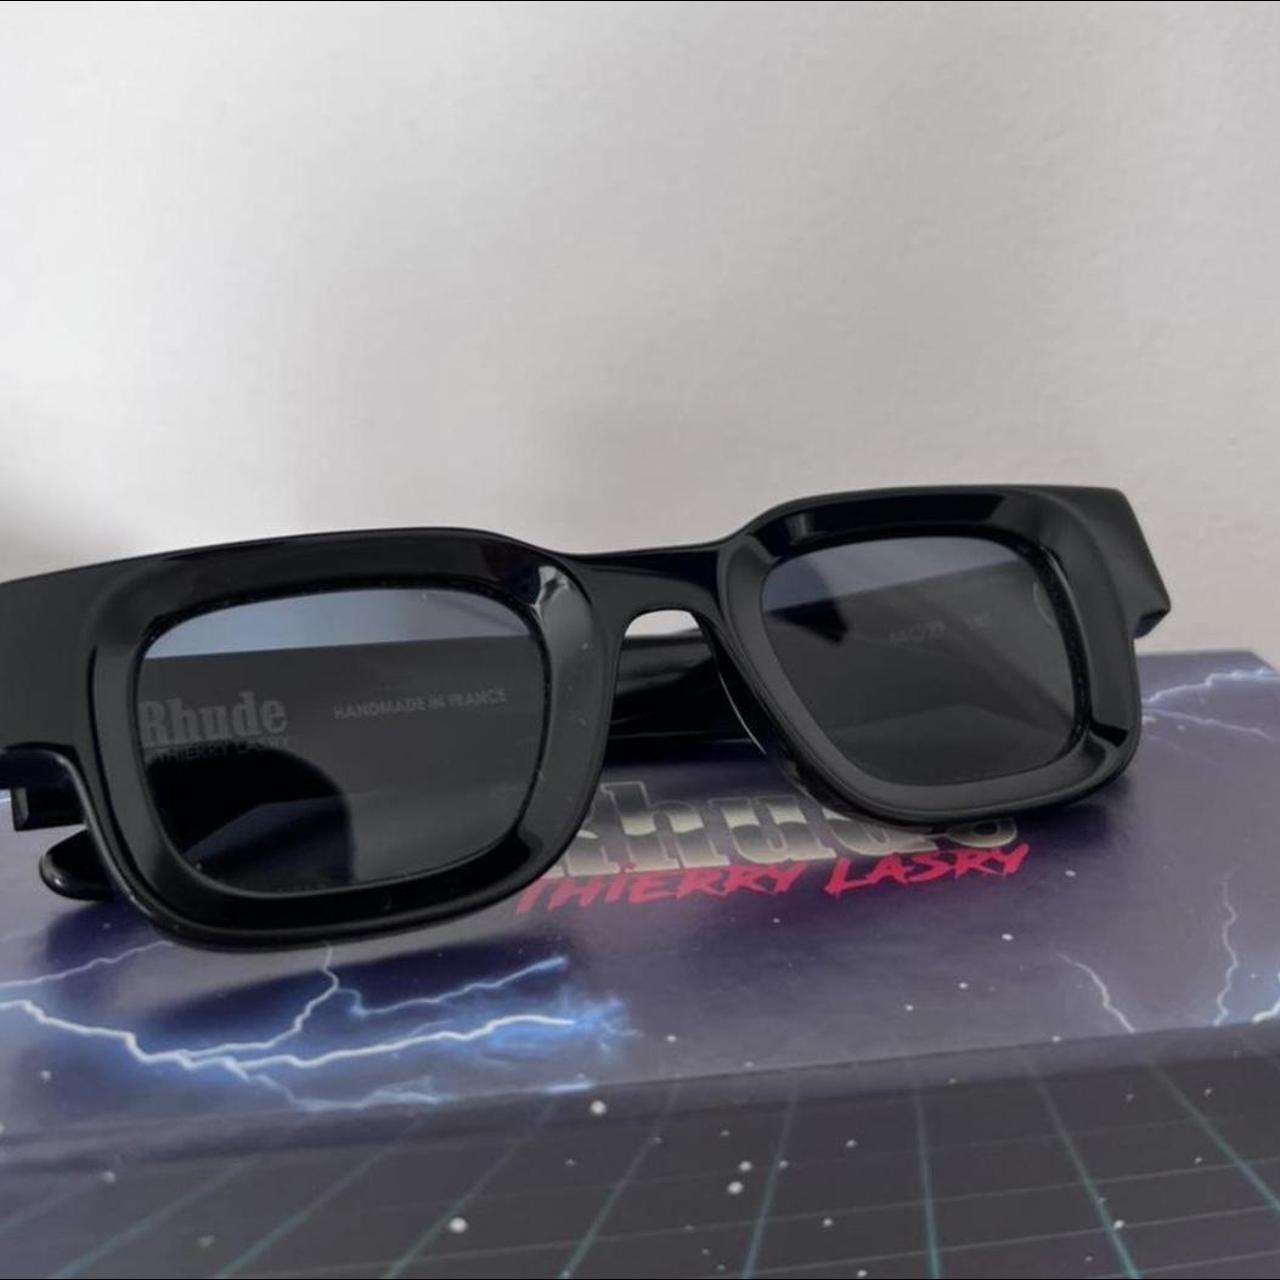 Product Image 1 - Rhude x Thierry Lasry Rhevision